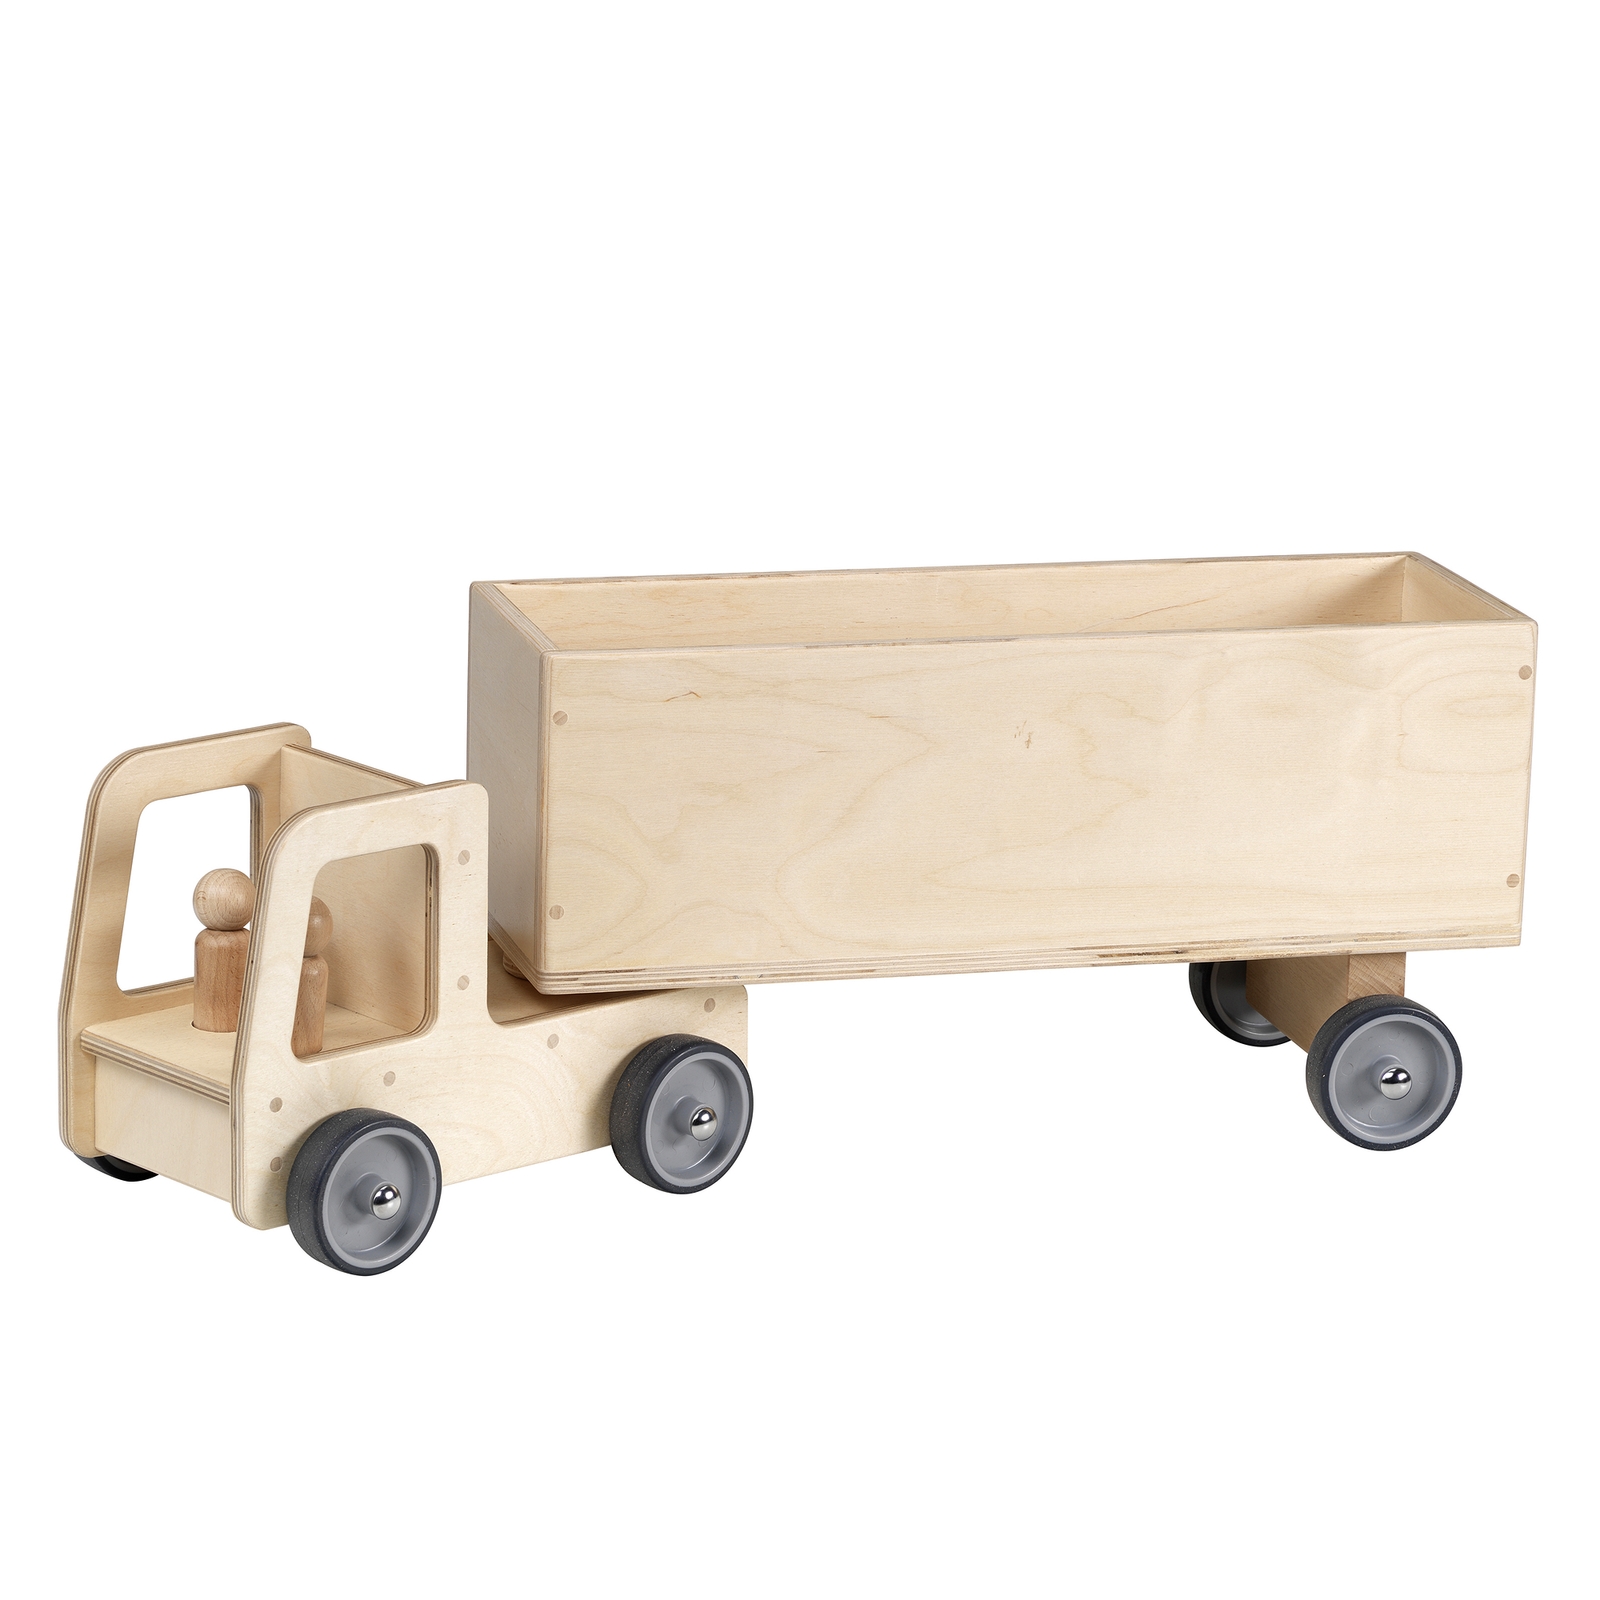 Millhouse - Giant Wooden Truck and Trailer